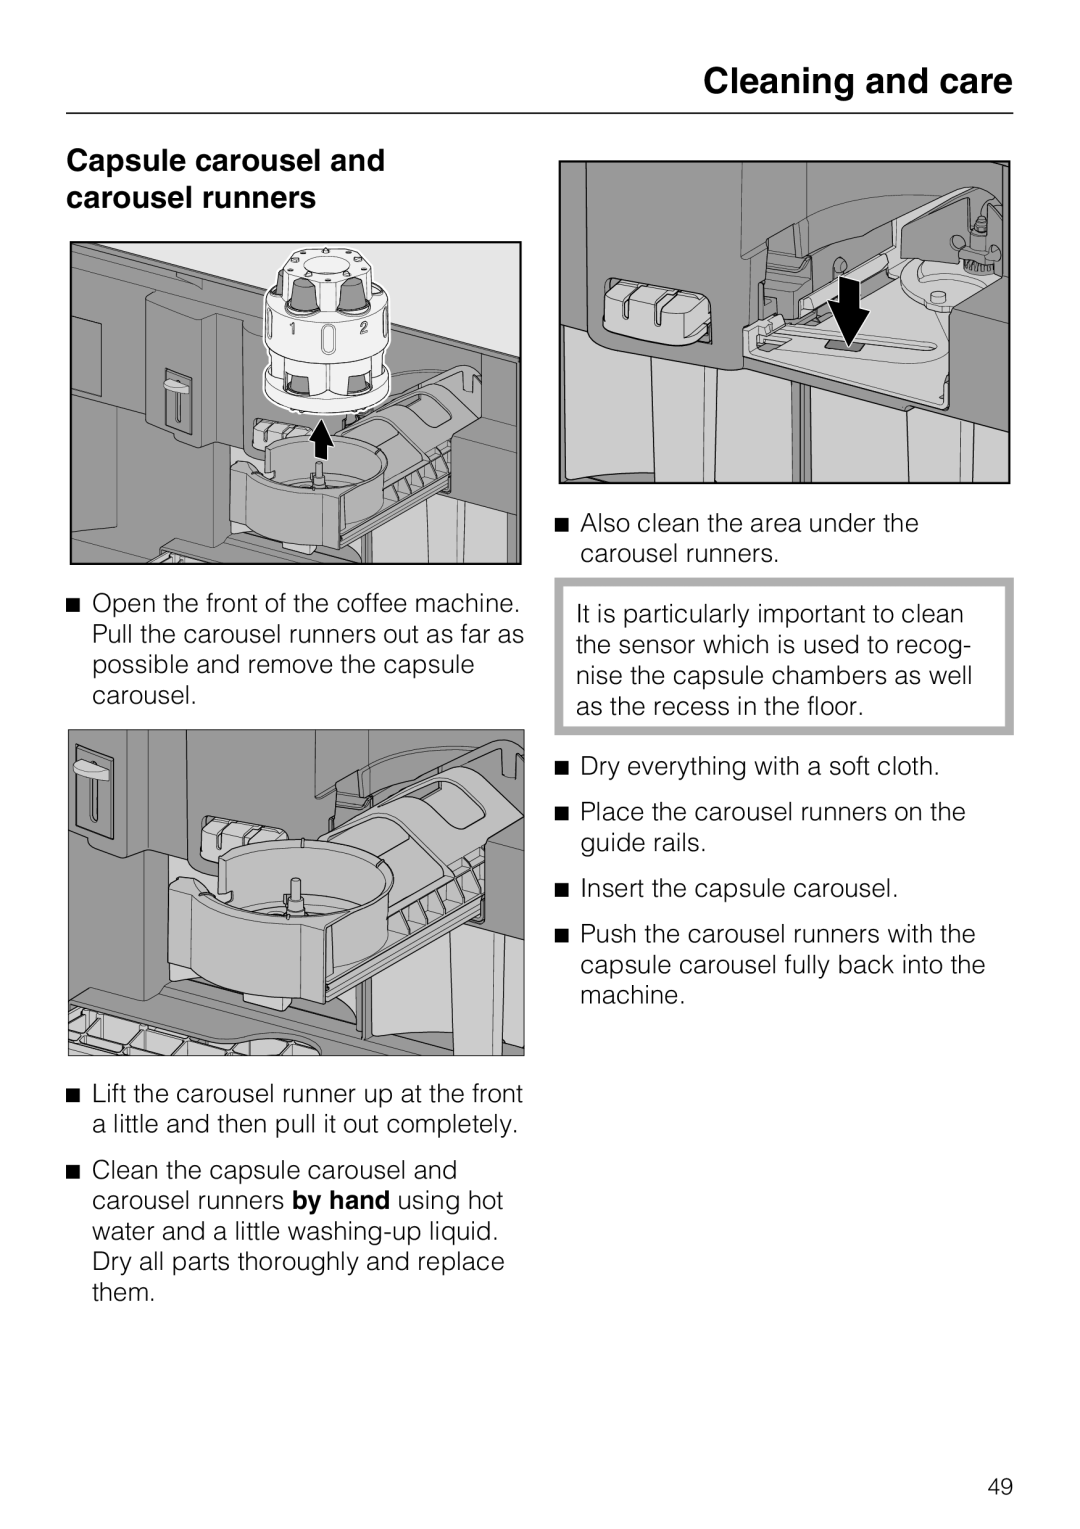 Miele CVA 6431 (C) installation instructions Capsule carousel and carousel runners, Cleaning and care 